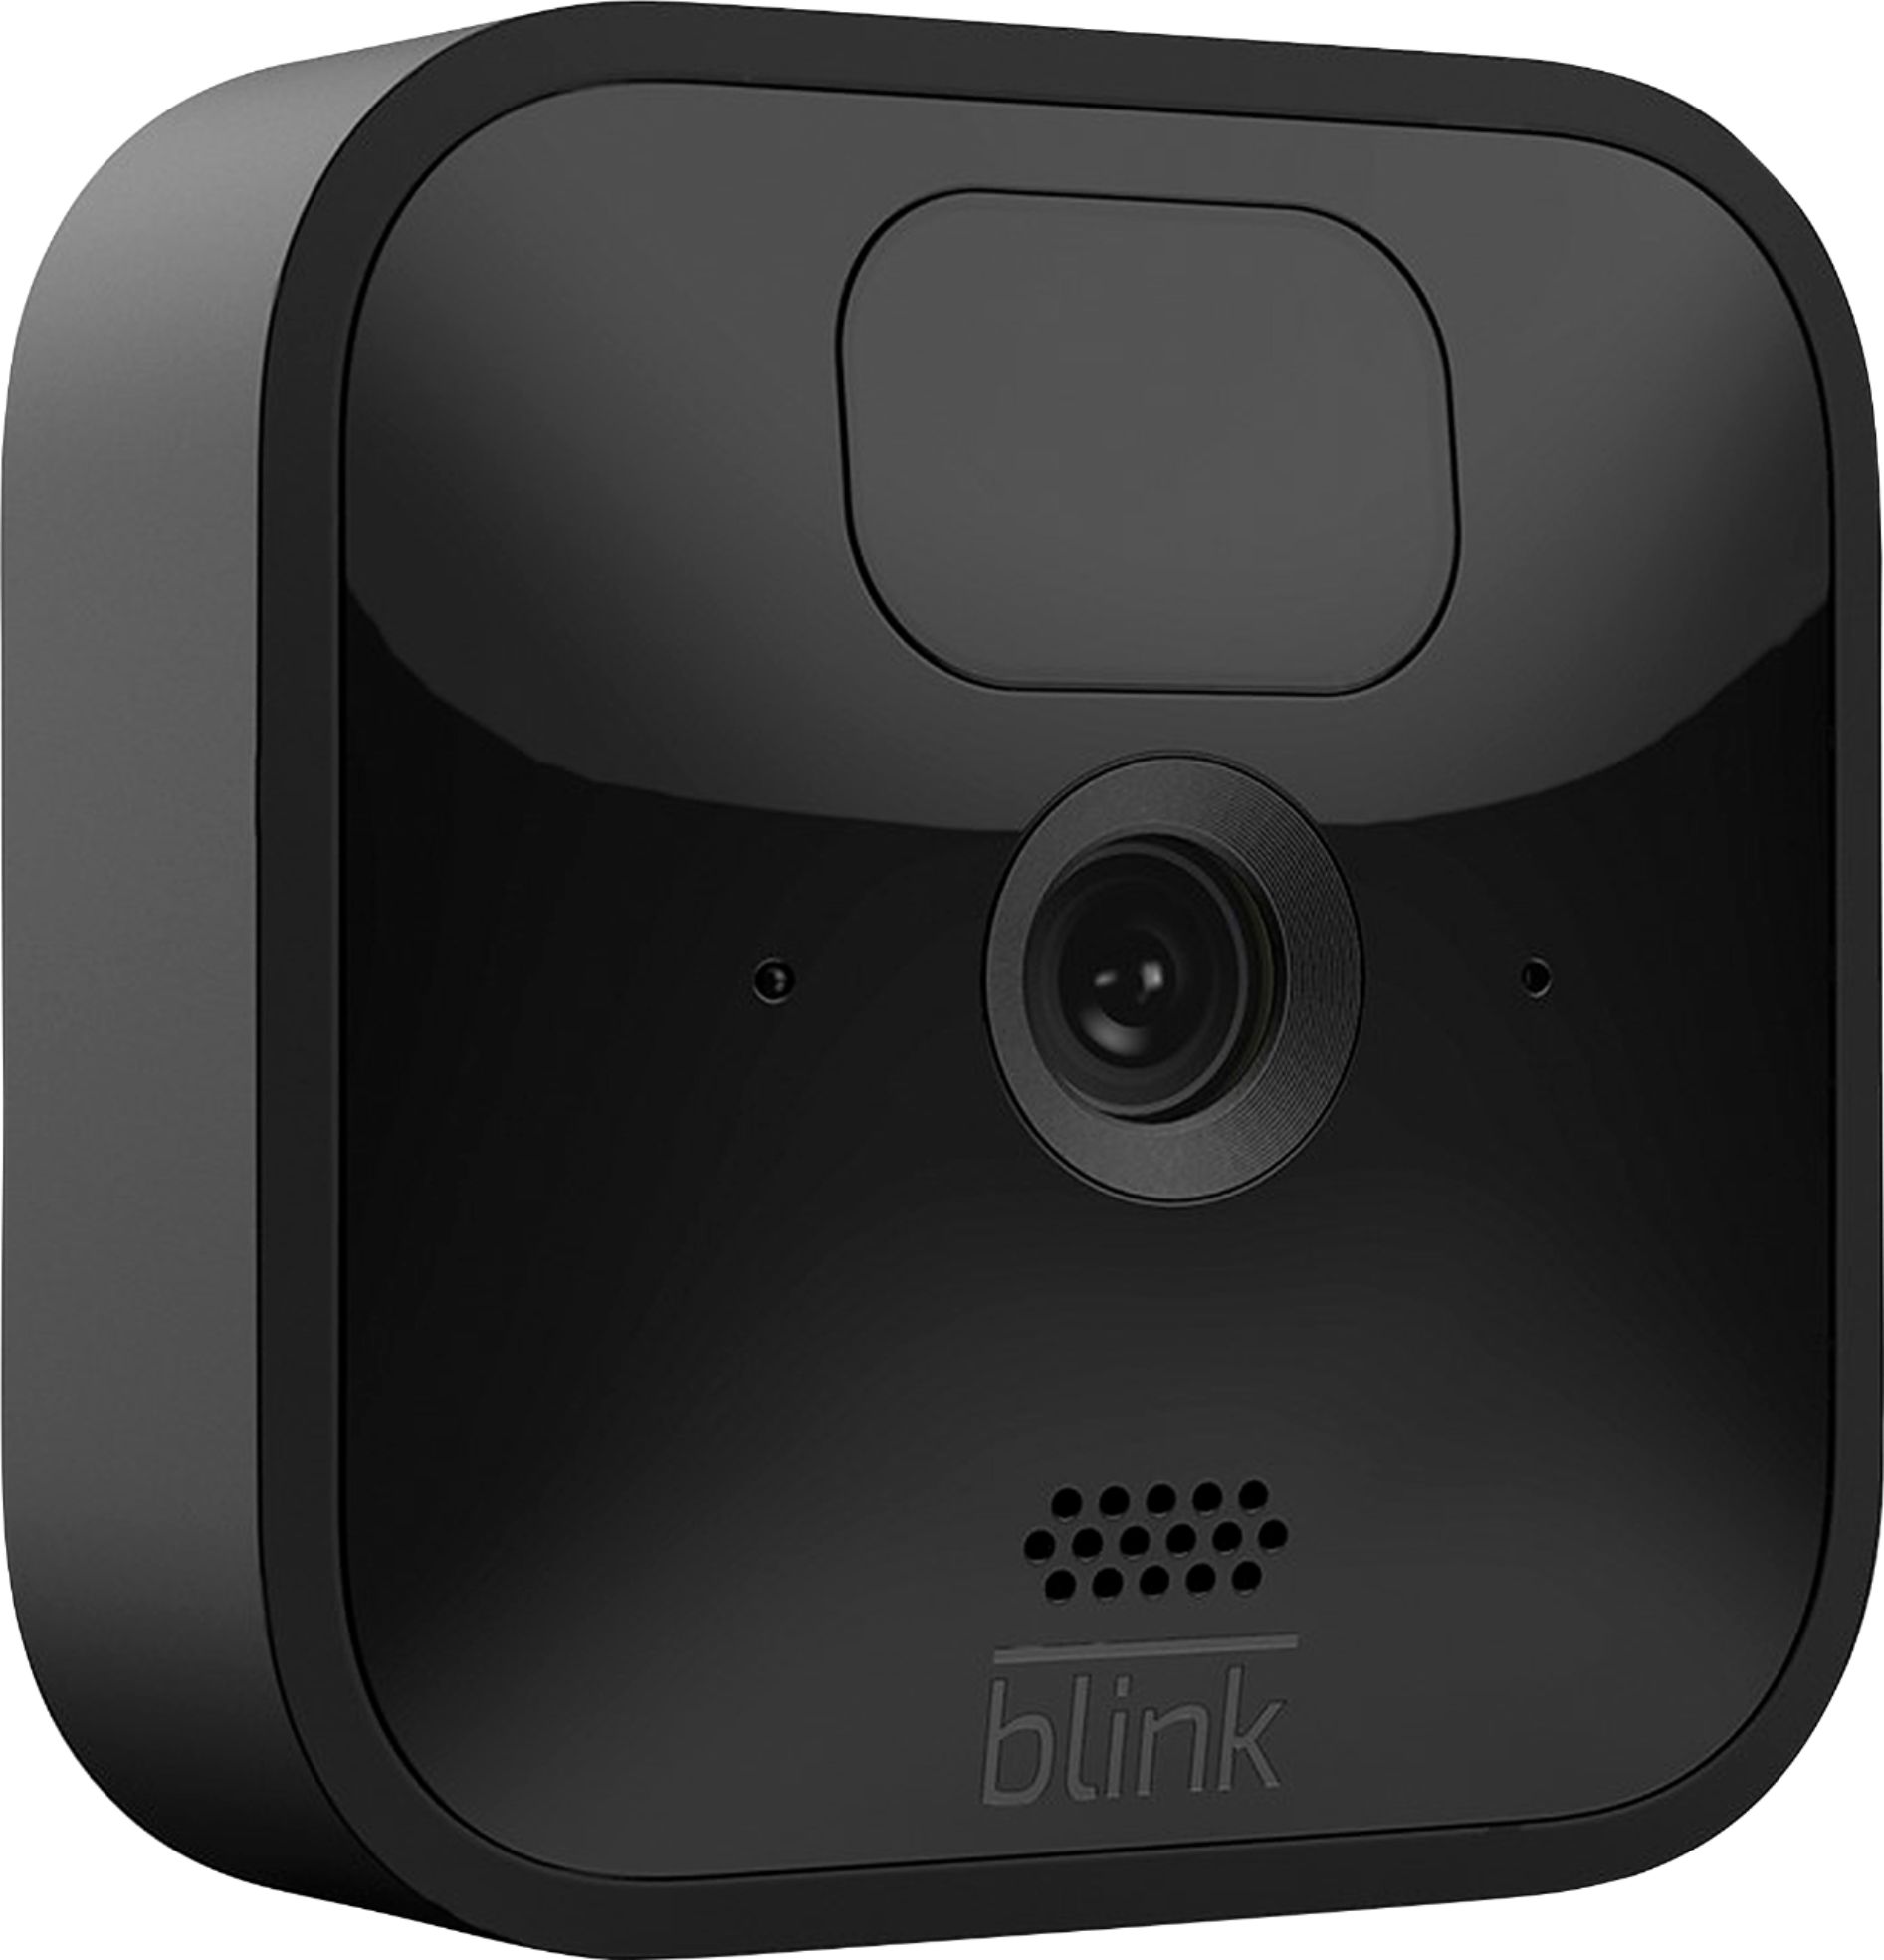 Blink Outdoor 4 security camera review